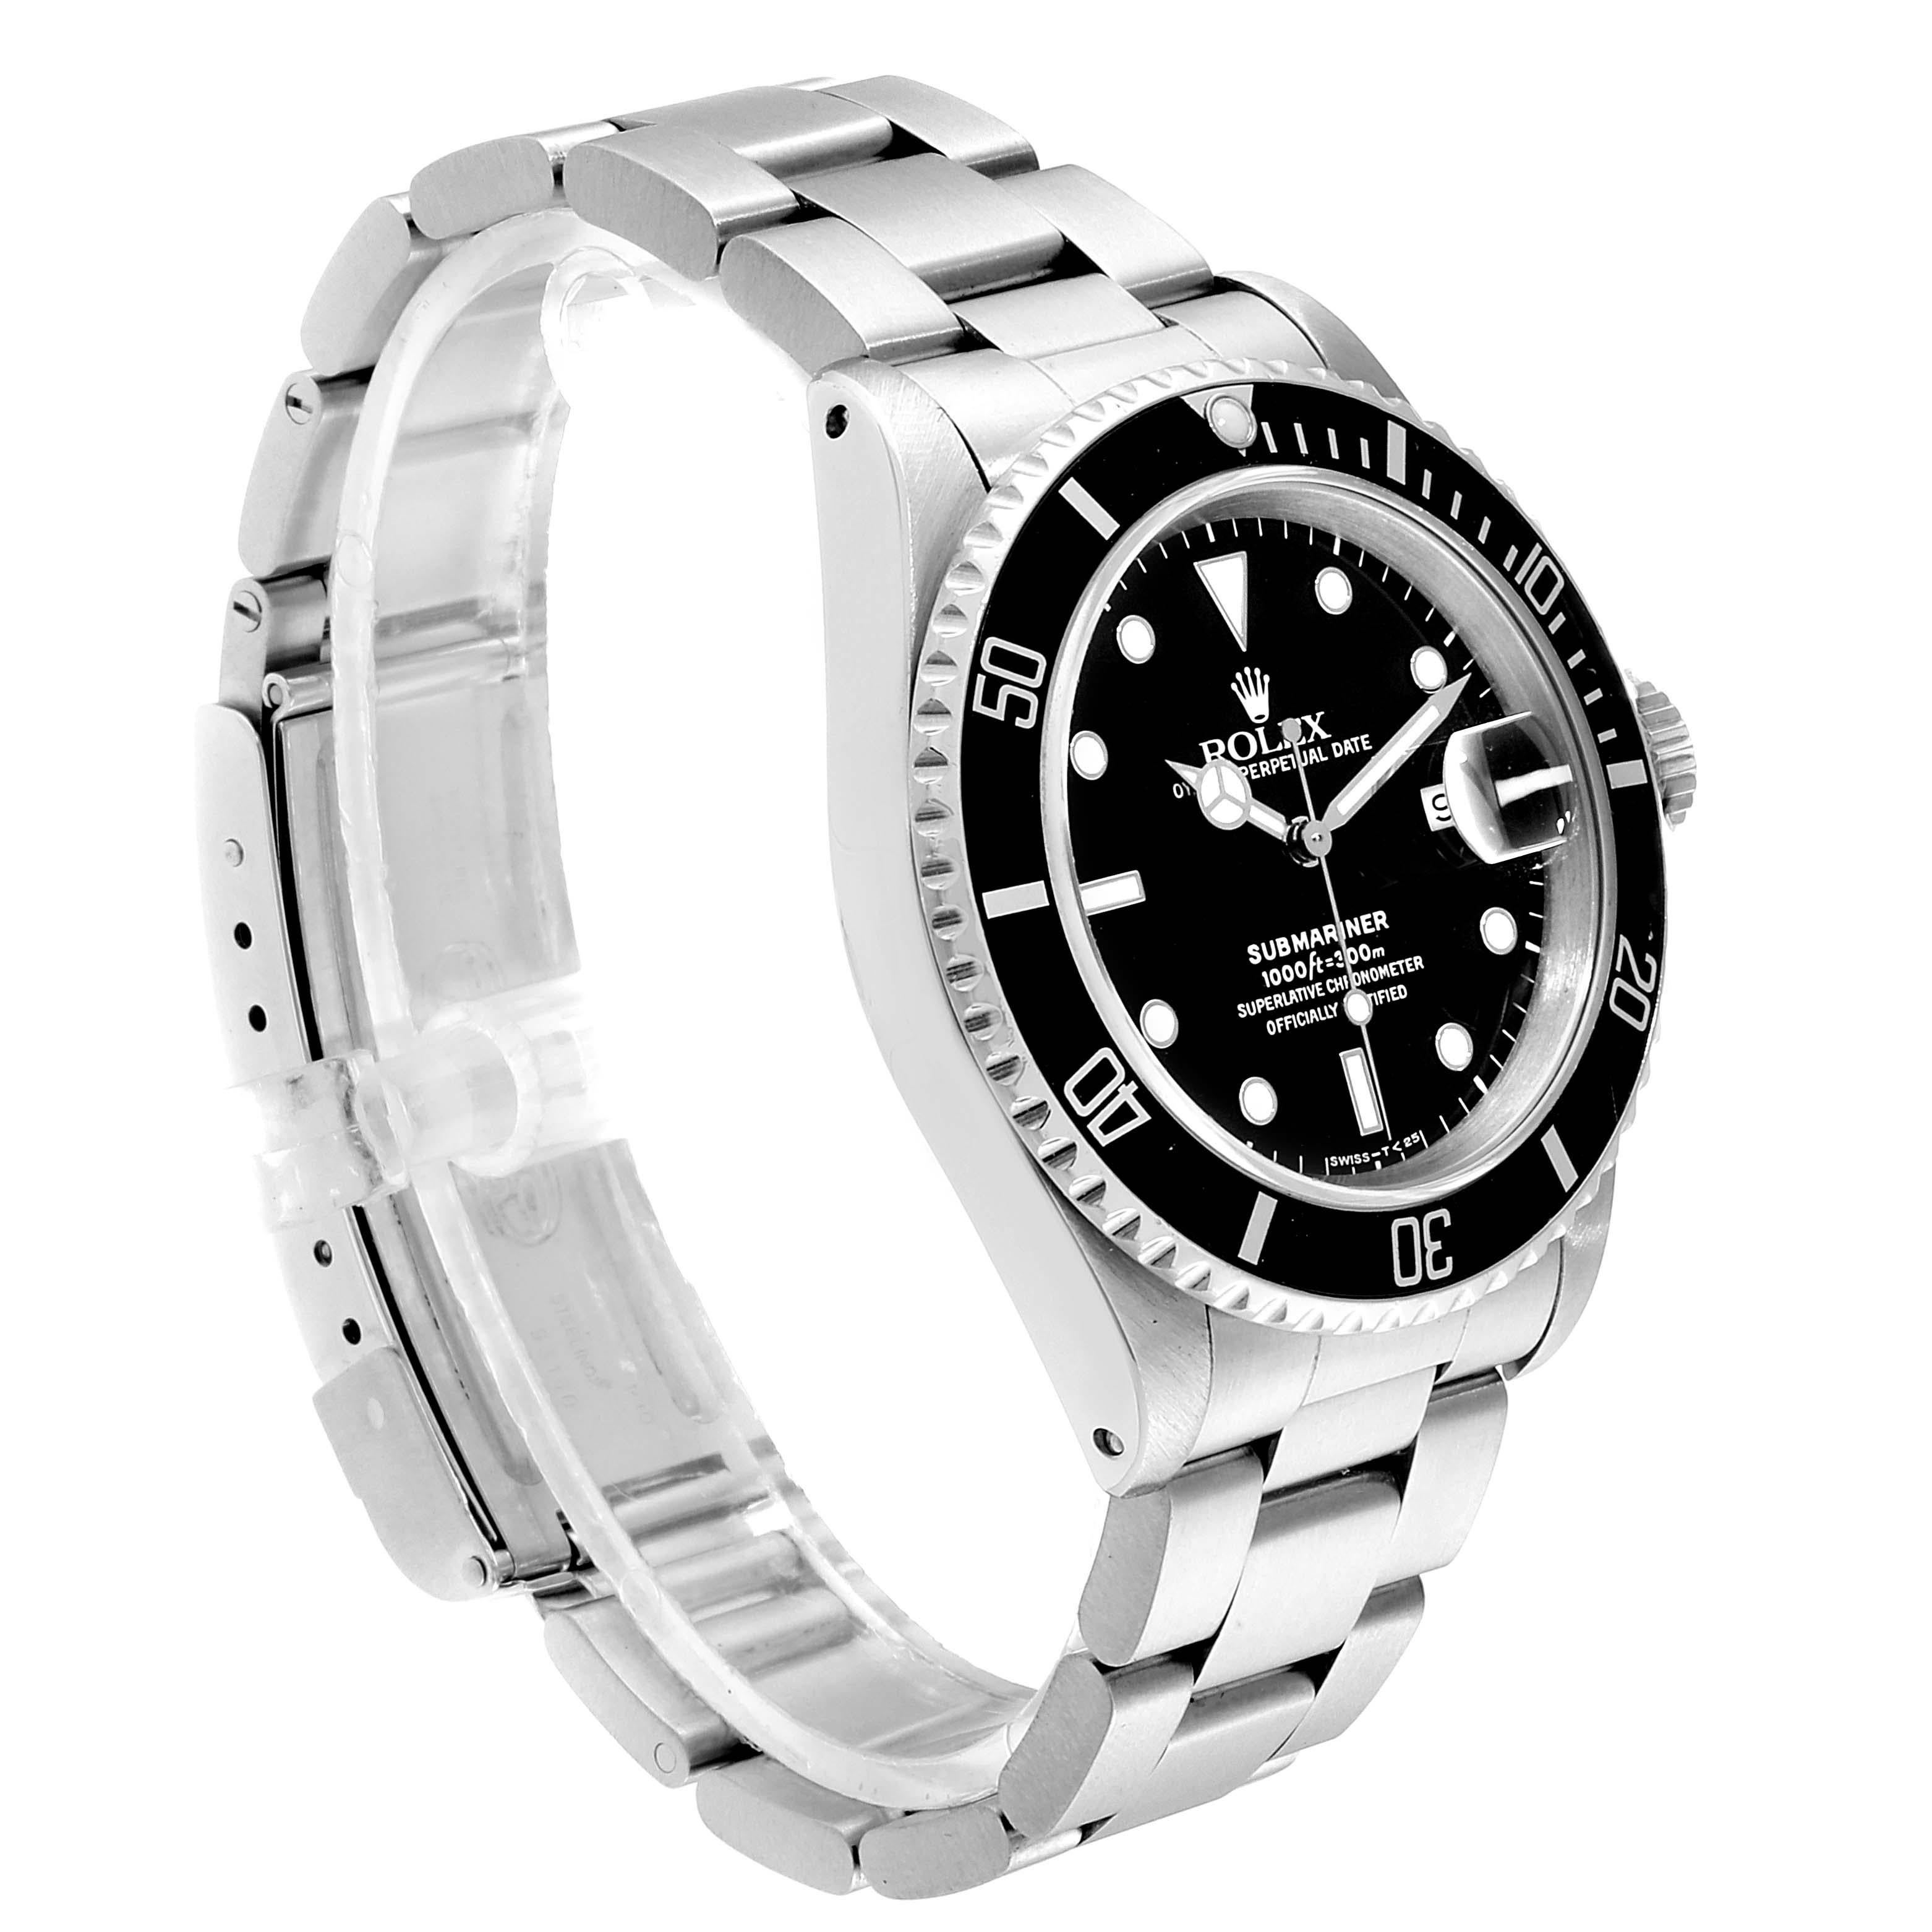 Rolex Submariner Date Stainless Steel Men's Watch 16610 In Good Condition For Sale In Atlanta, GA